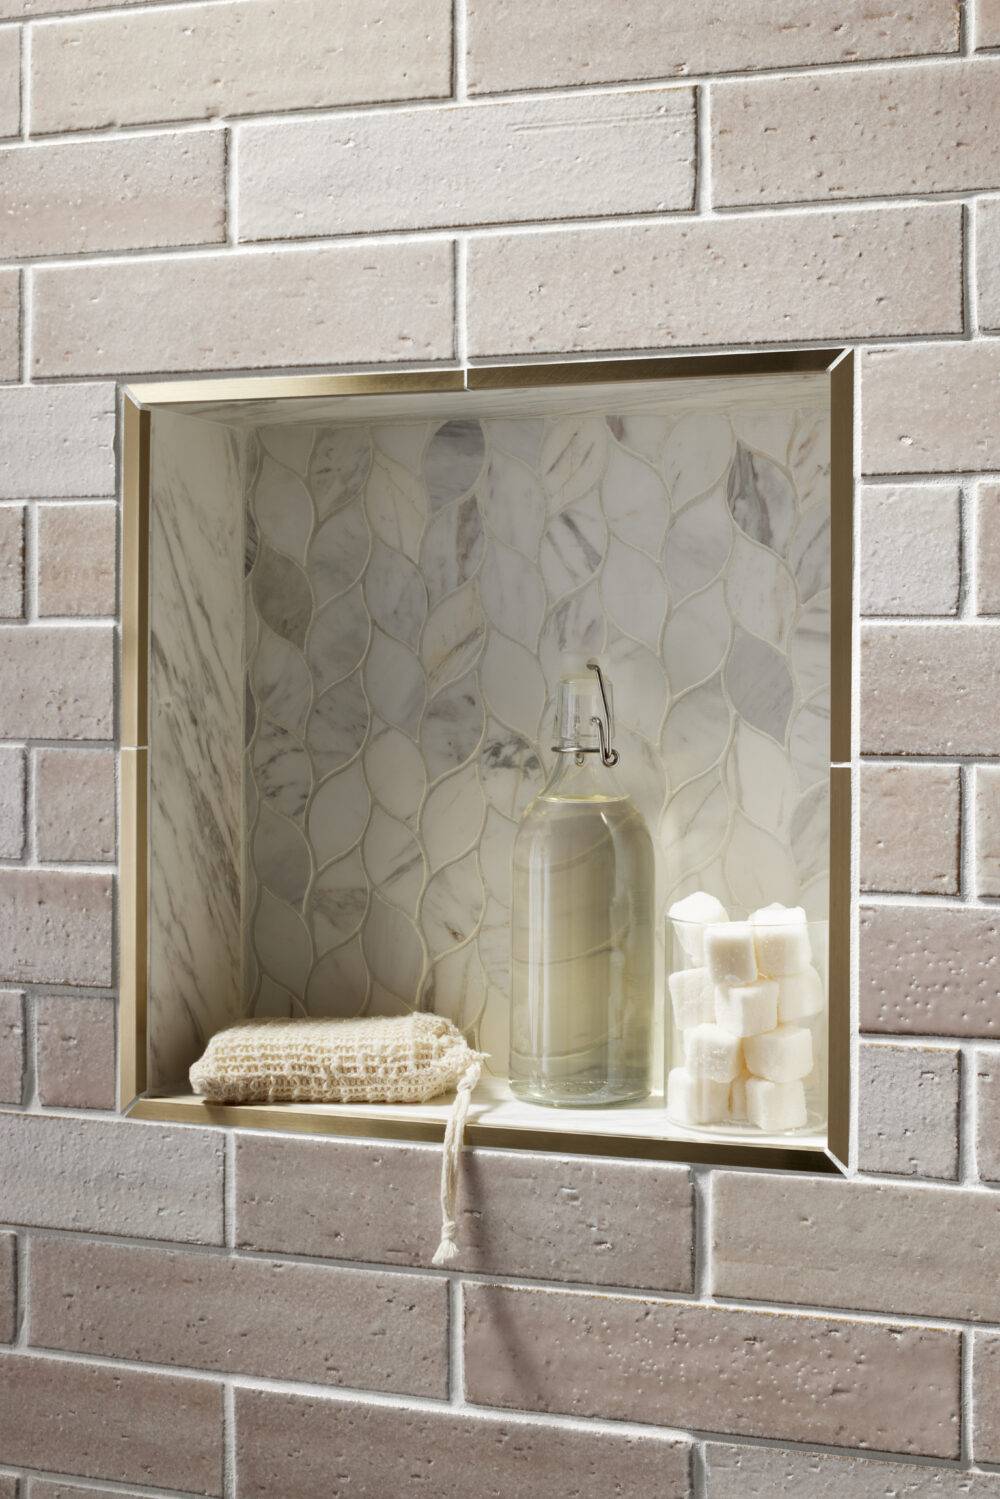 Brick-look subway tile and marble mosaic shower niche. 